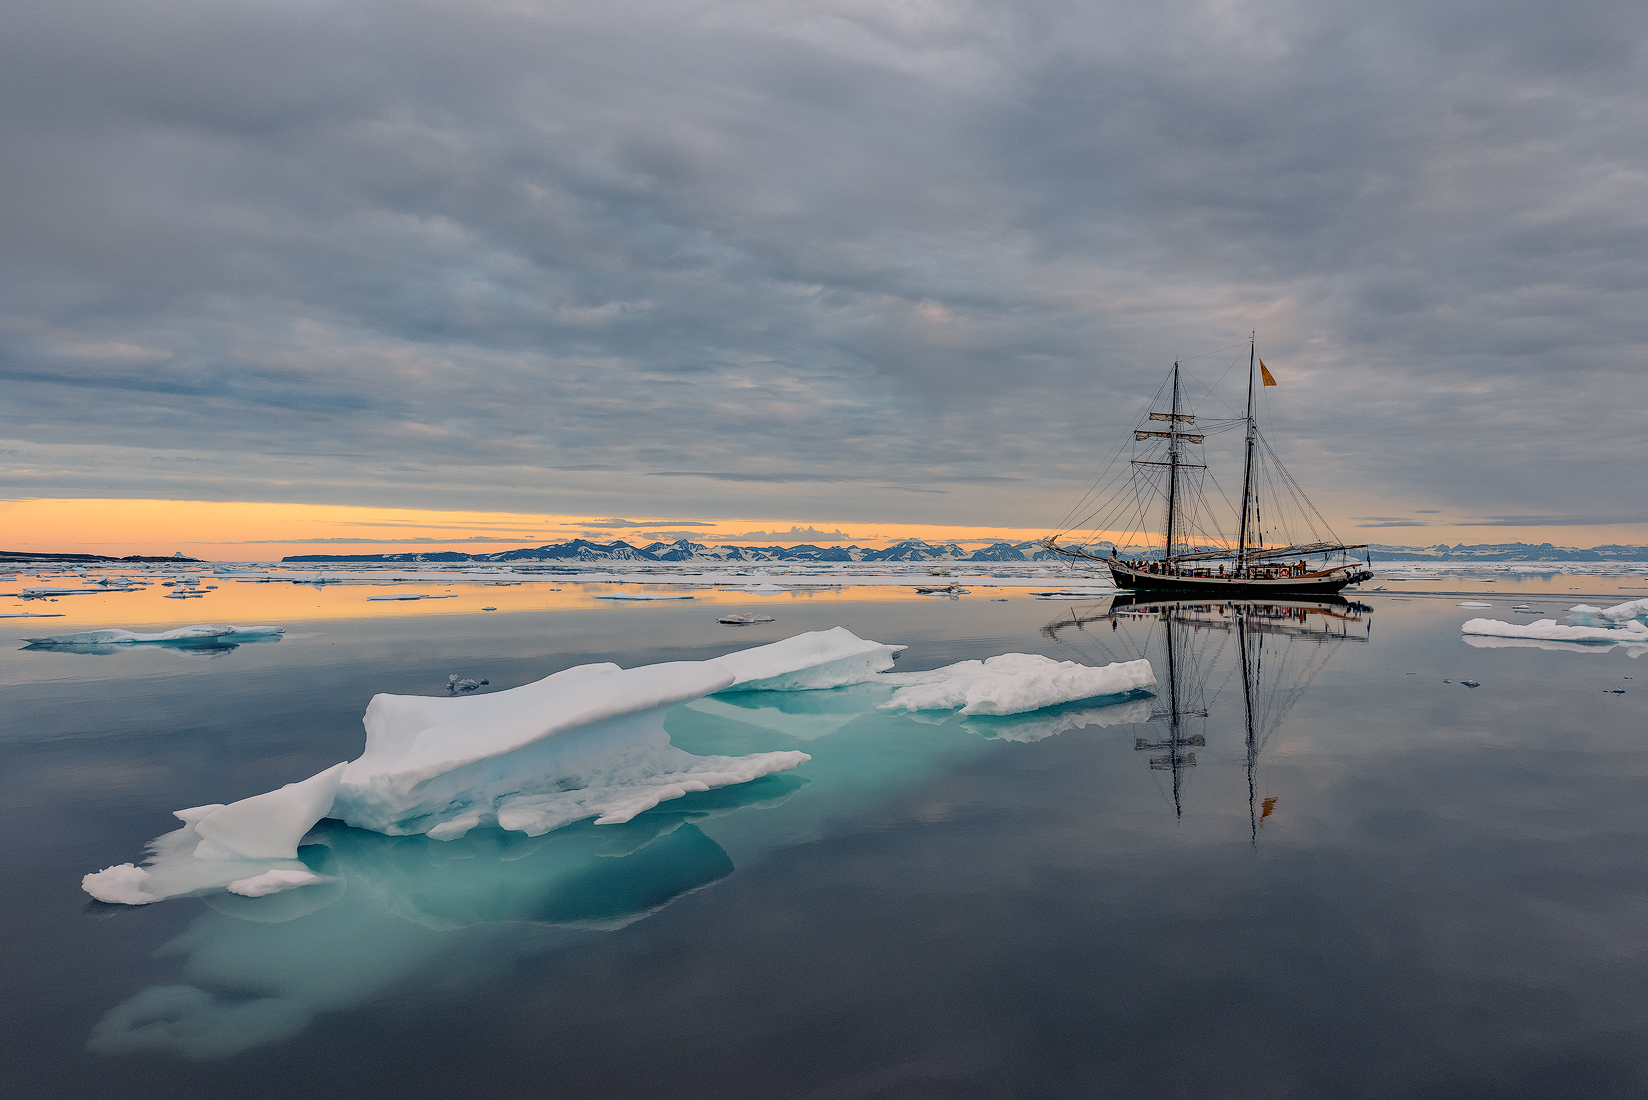 The Donna Wood vessel silently trailing past icebergs off the coast of Greenland.